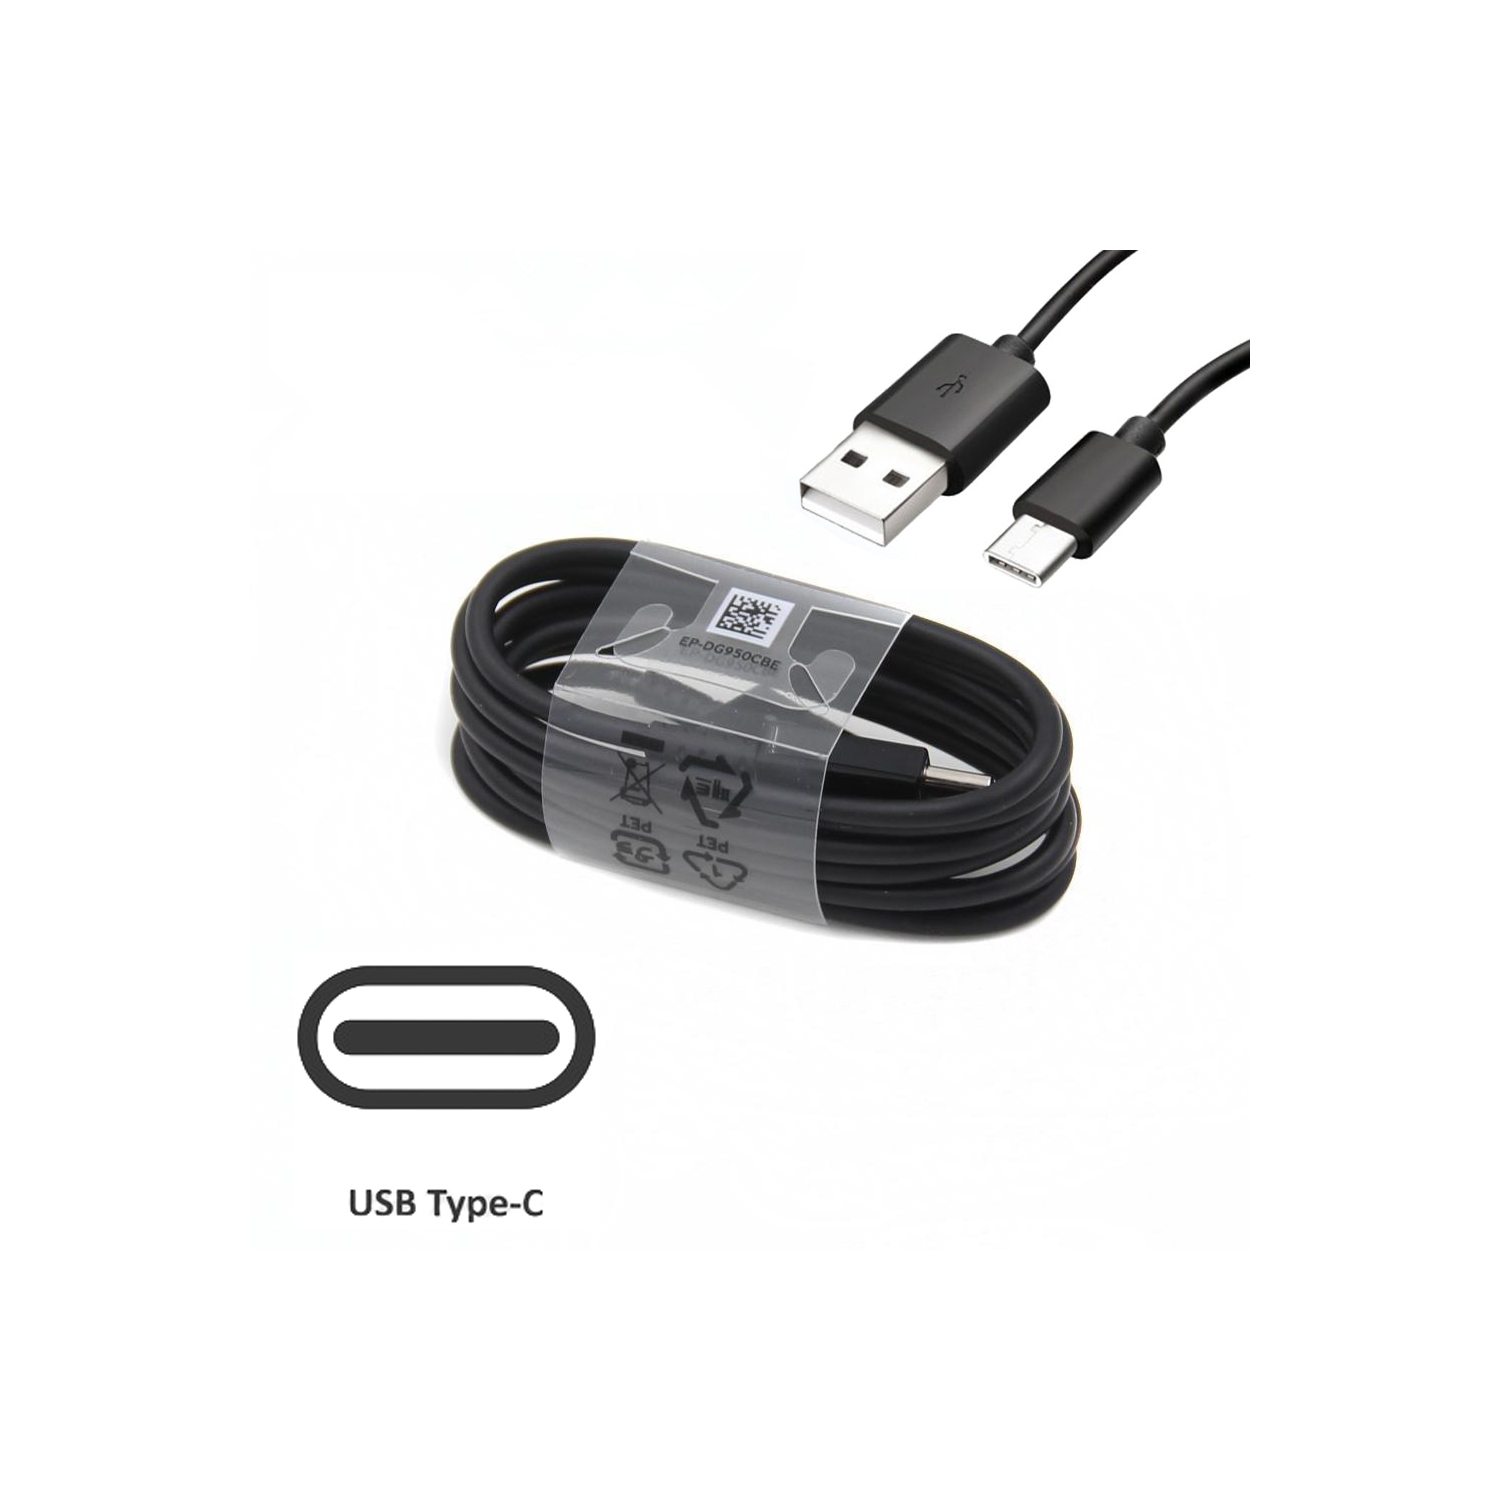 USB to Type C Fast Charging Charger Data & Sync Cable for Samsung Galaxy S8 S9 S10 S20 Note 8 9 10 20, Black